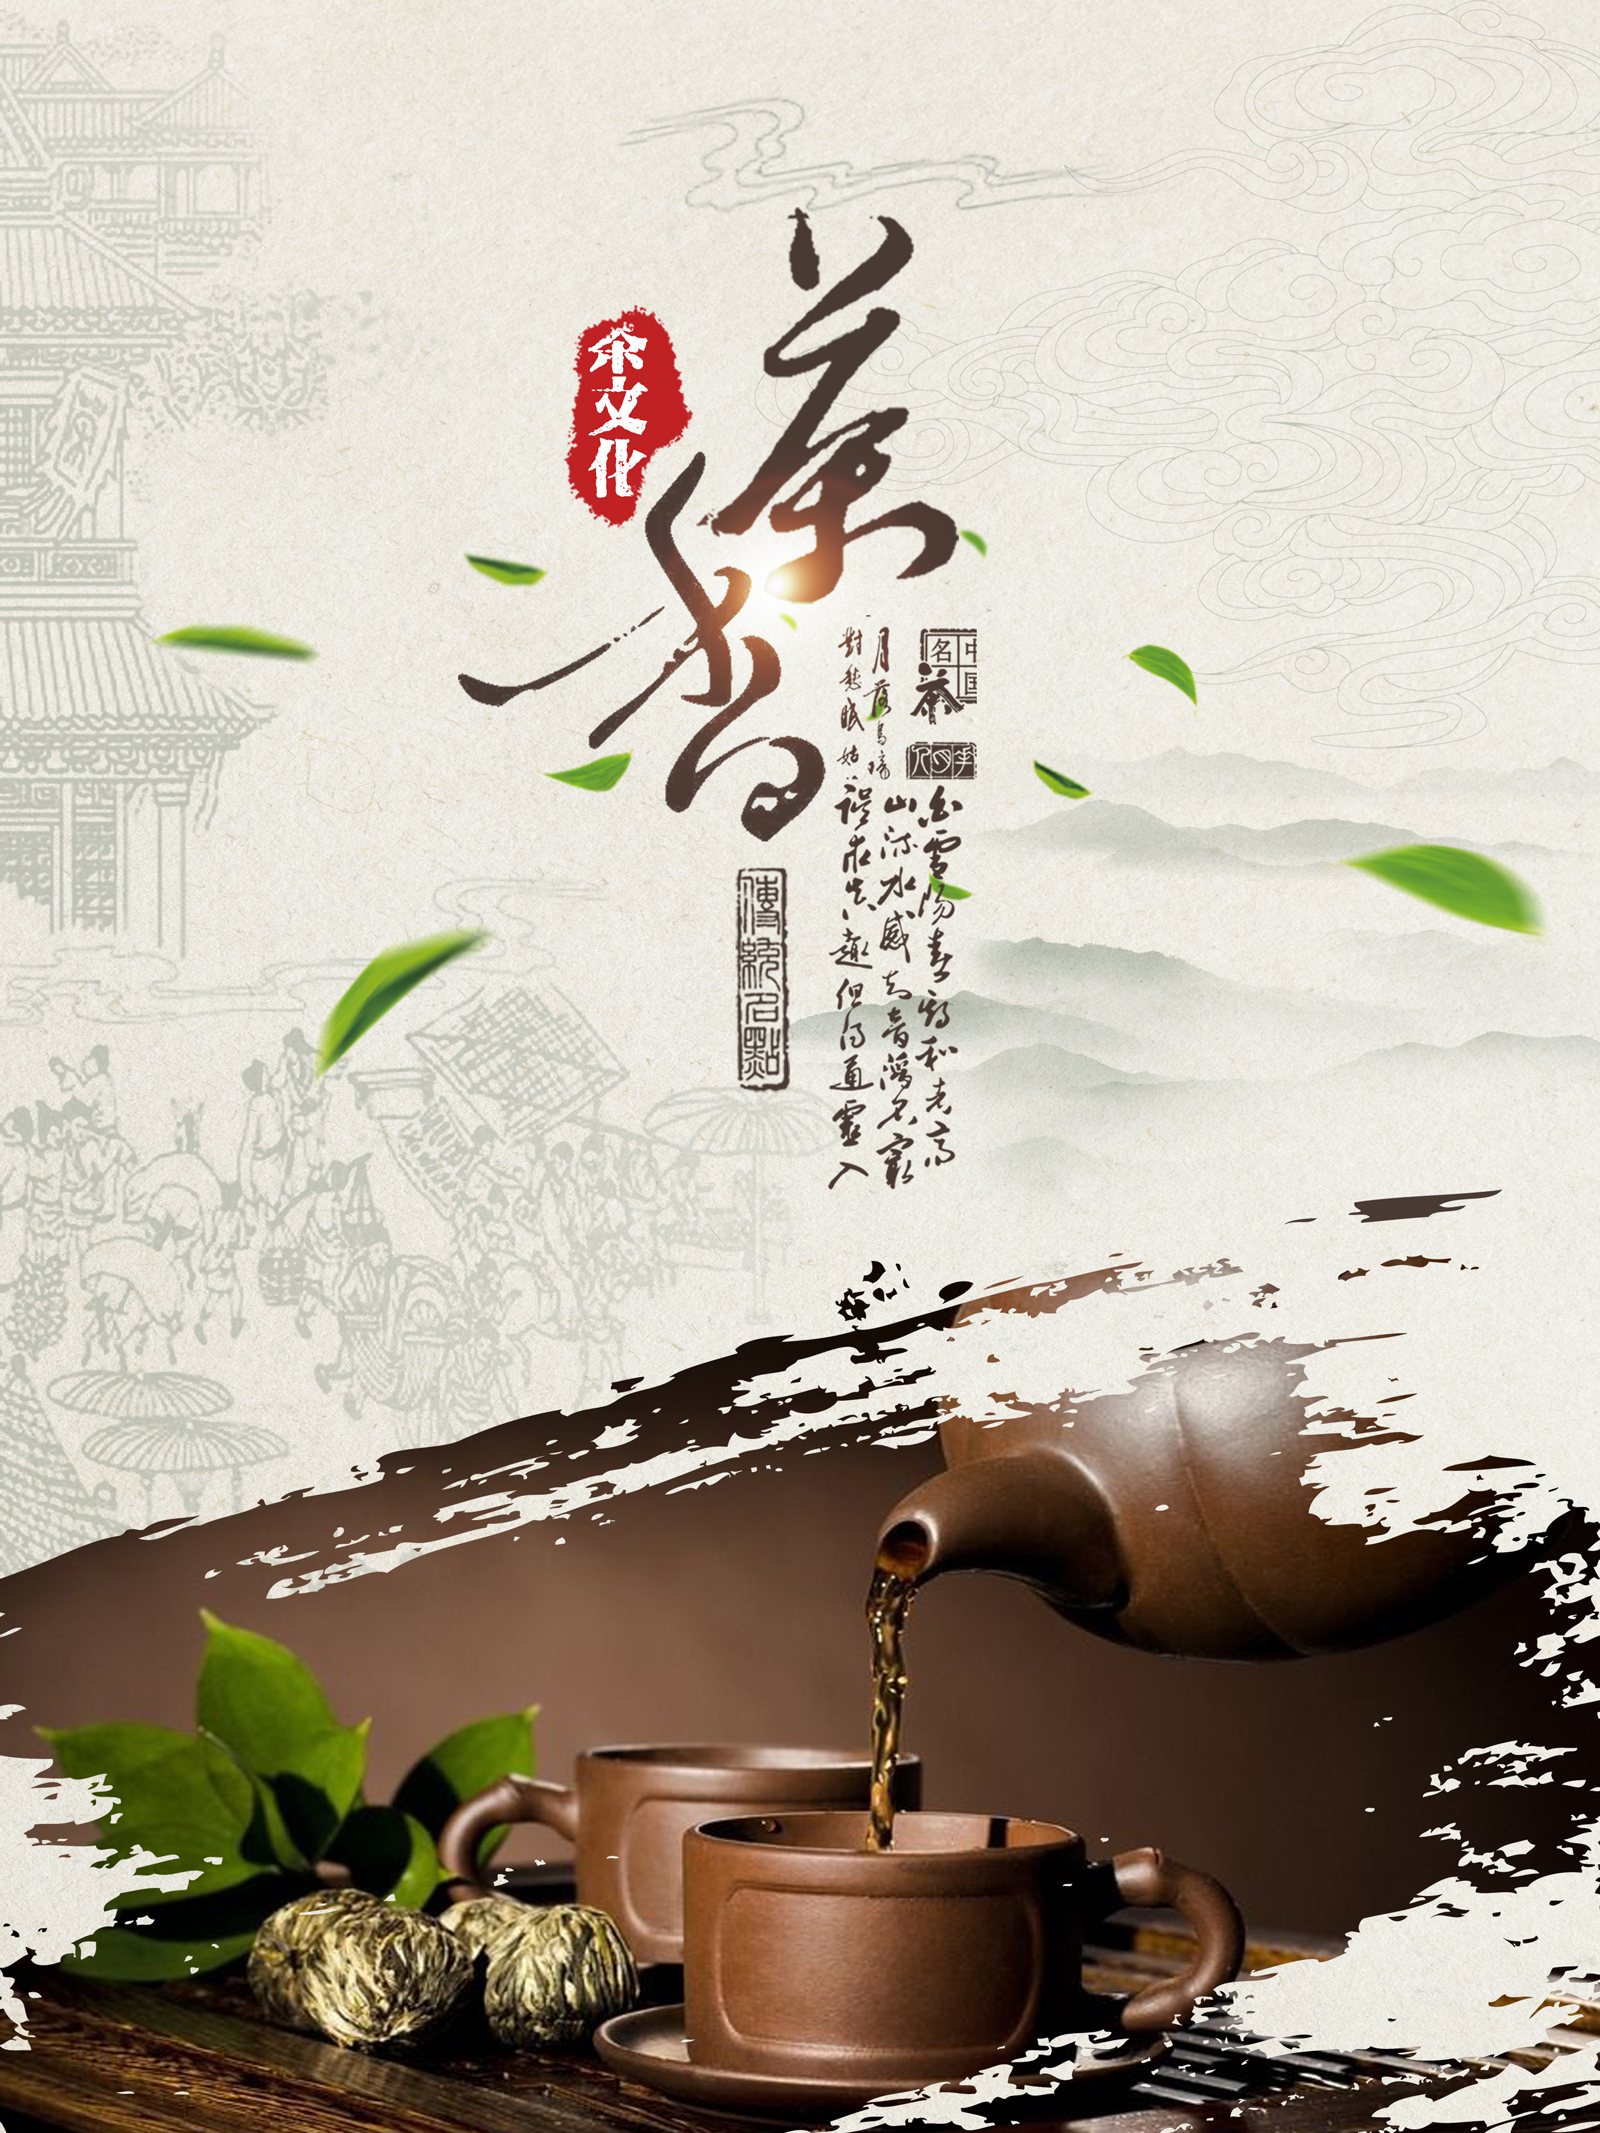 Chinese tea culture - PSD File Free Download